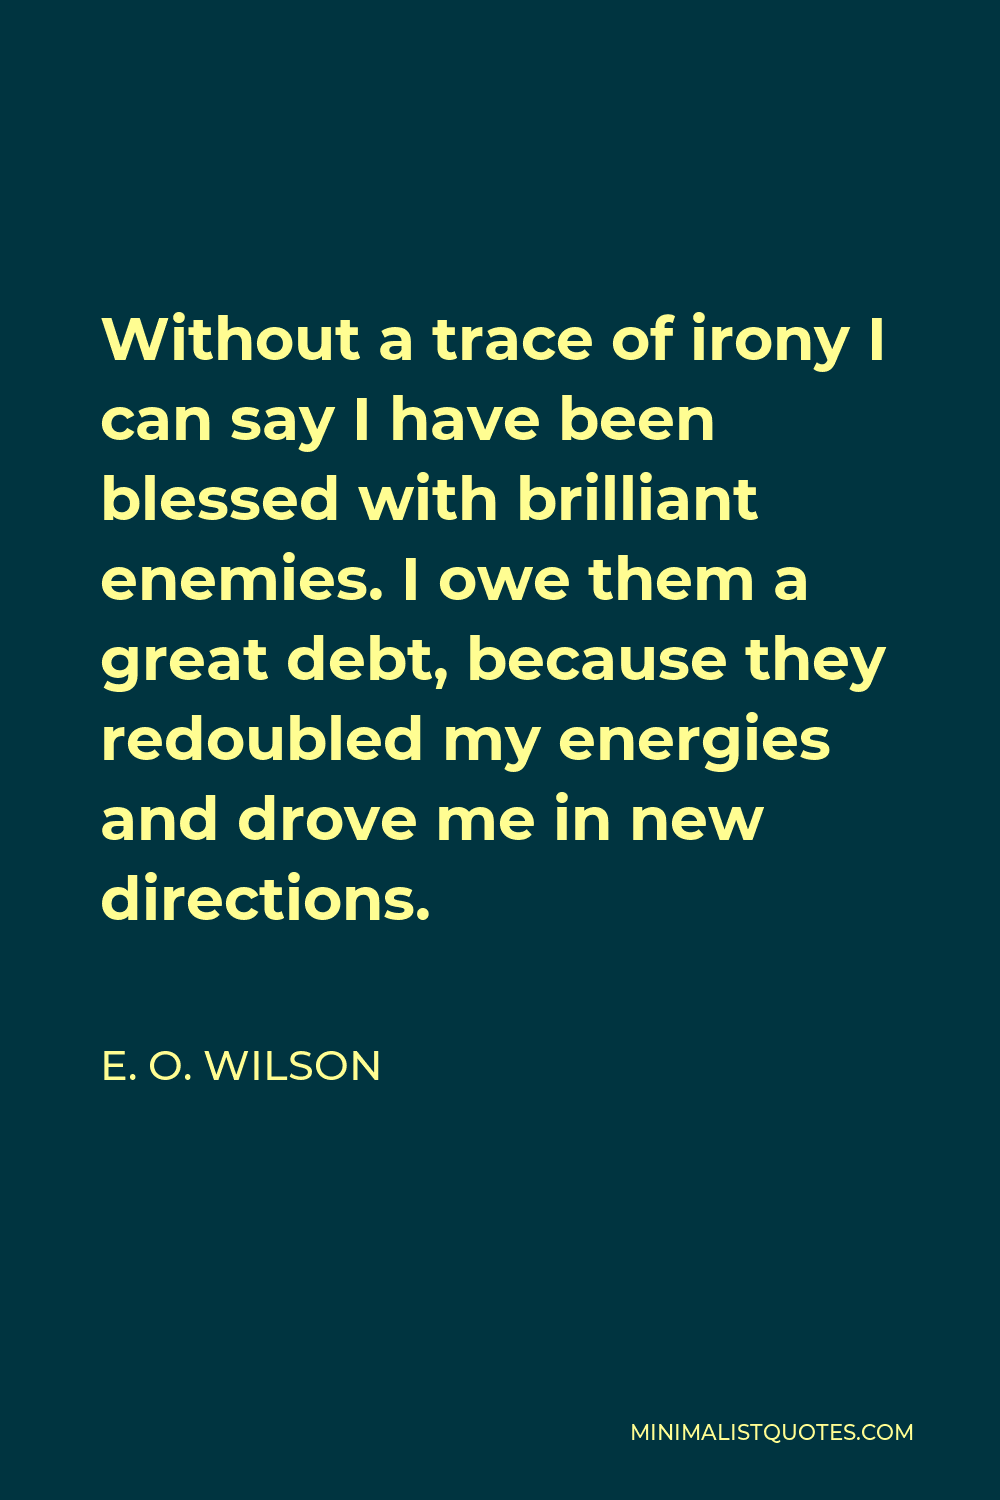 E. O. Wilson Quote - Without a trace of irony I can say I have been blessed with brilliant enemies. I owe them a great debt, because they redoubled my energies and drove me in new directions.